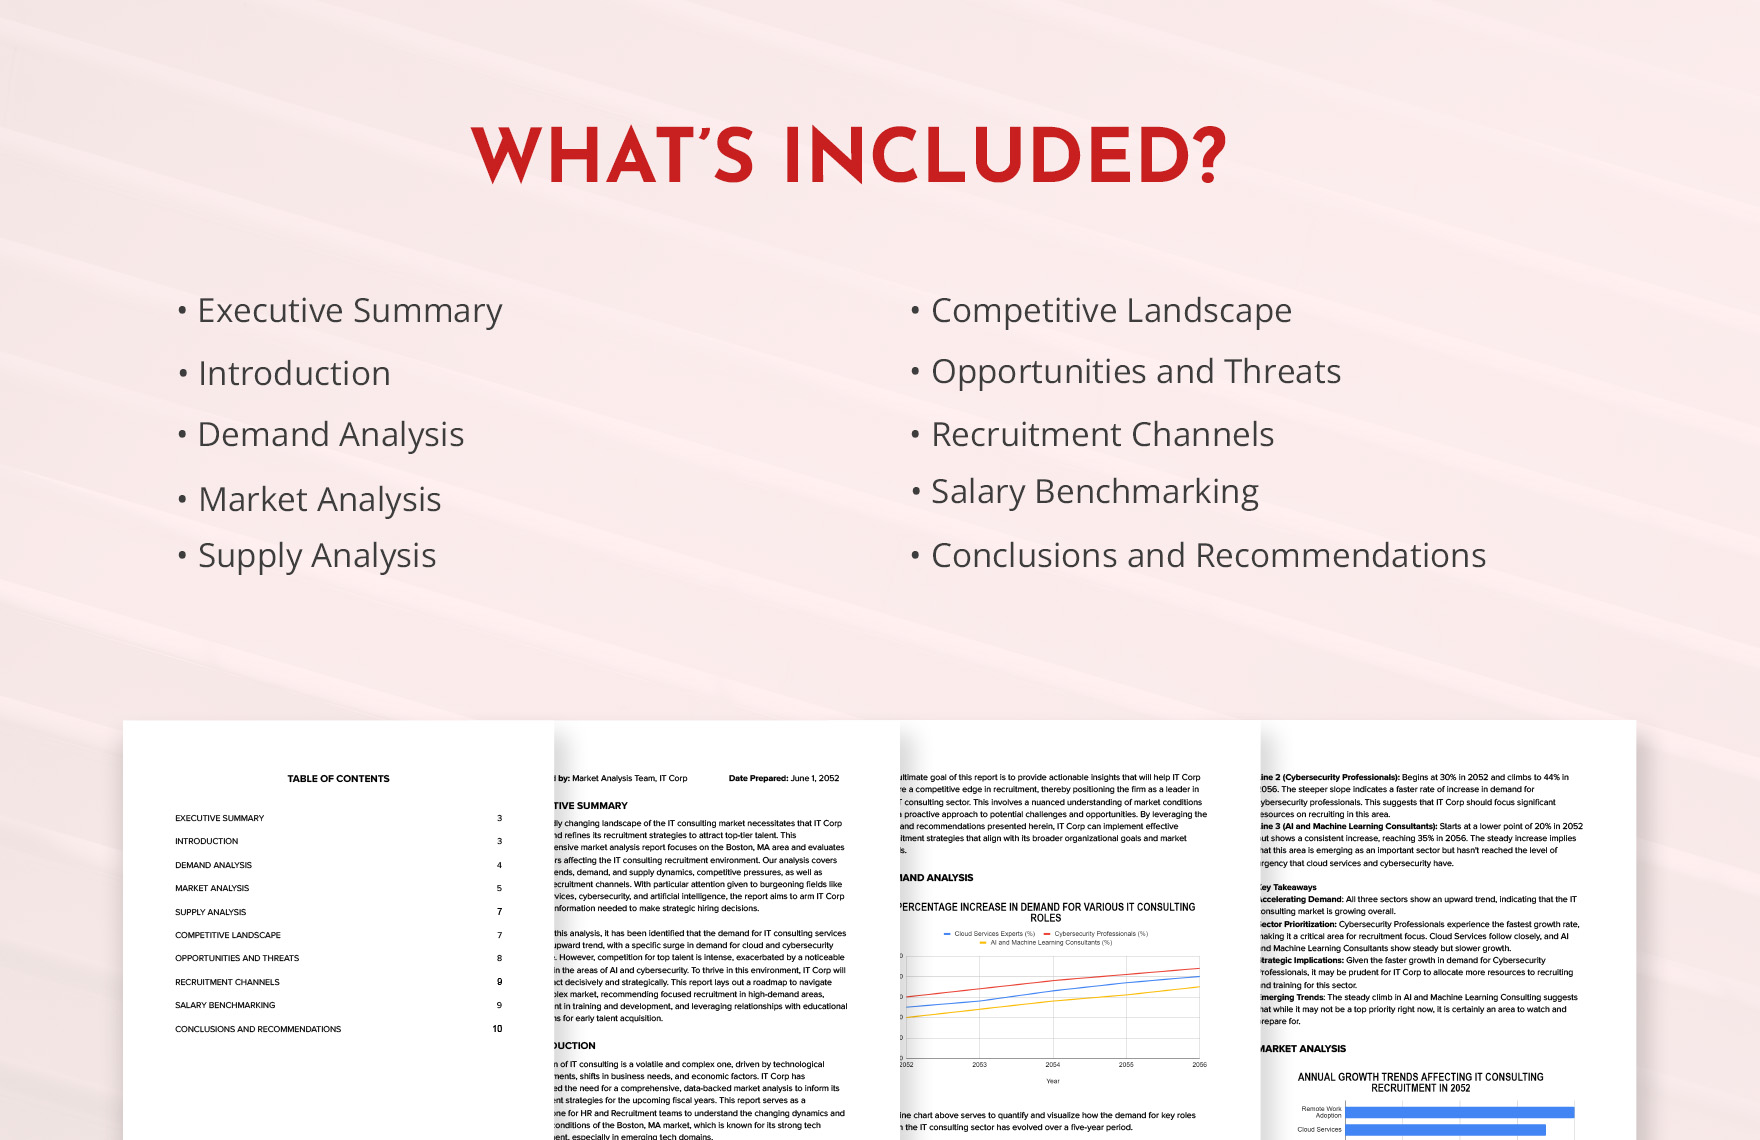 IT Consulting Recruitment Market Analysis Template